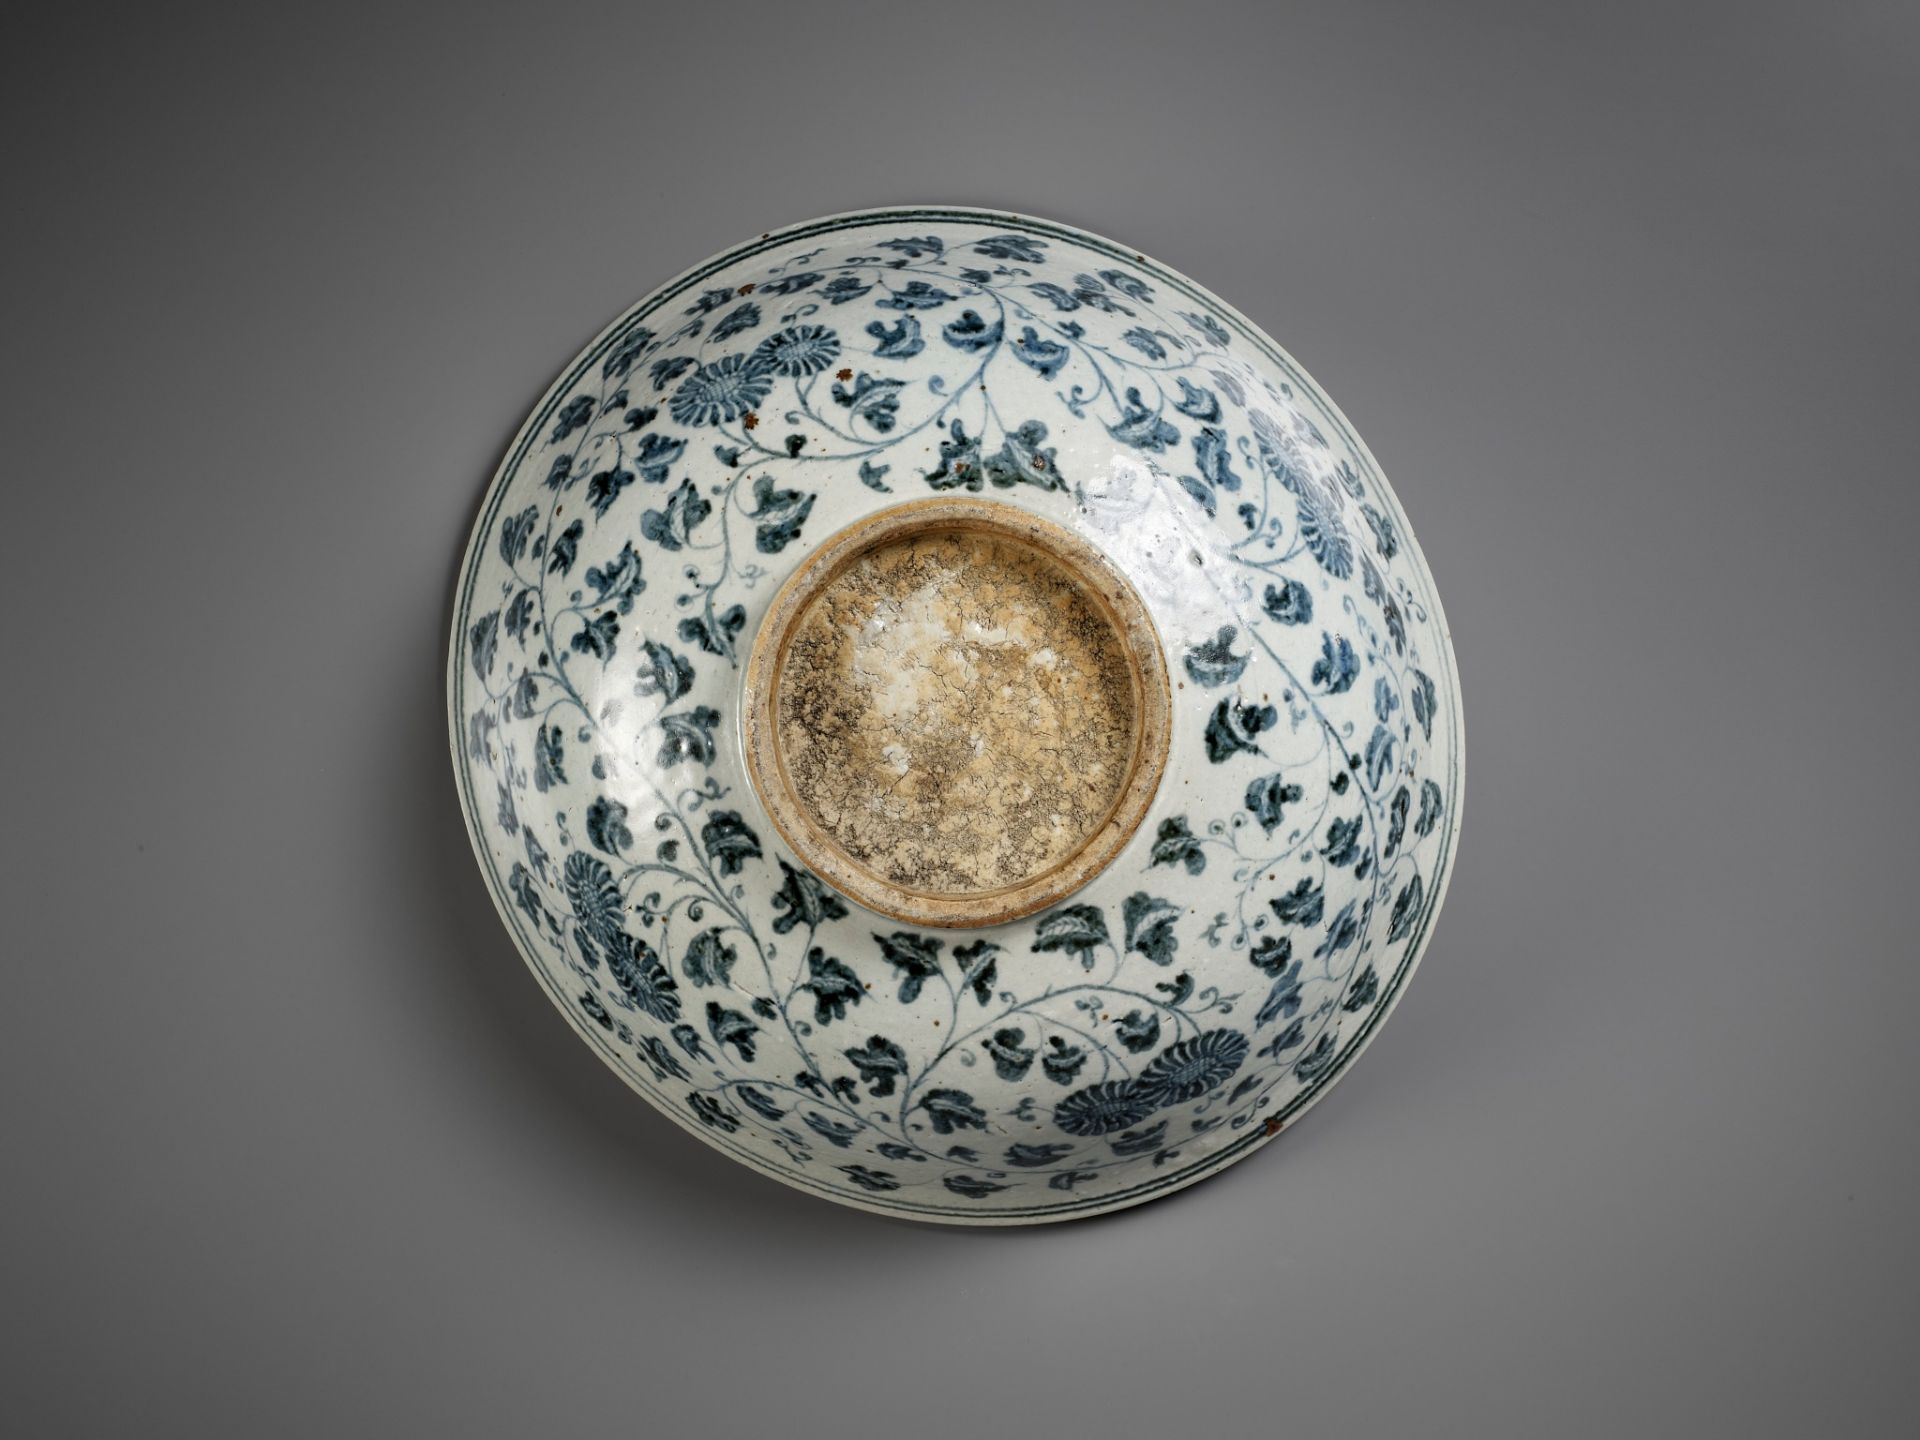 A LARGE ANNAMESE BLUE AND WHITE BOWL, VIETNAM, 14TH-15TH CENTURY - Image 3 of 12